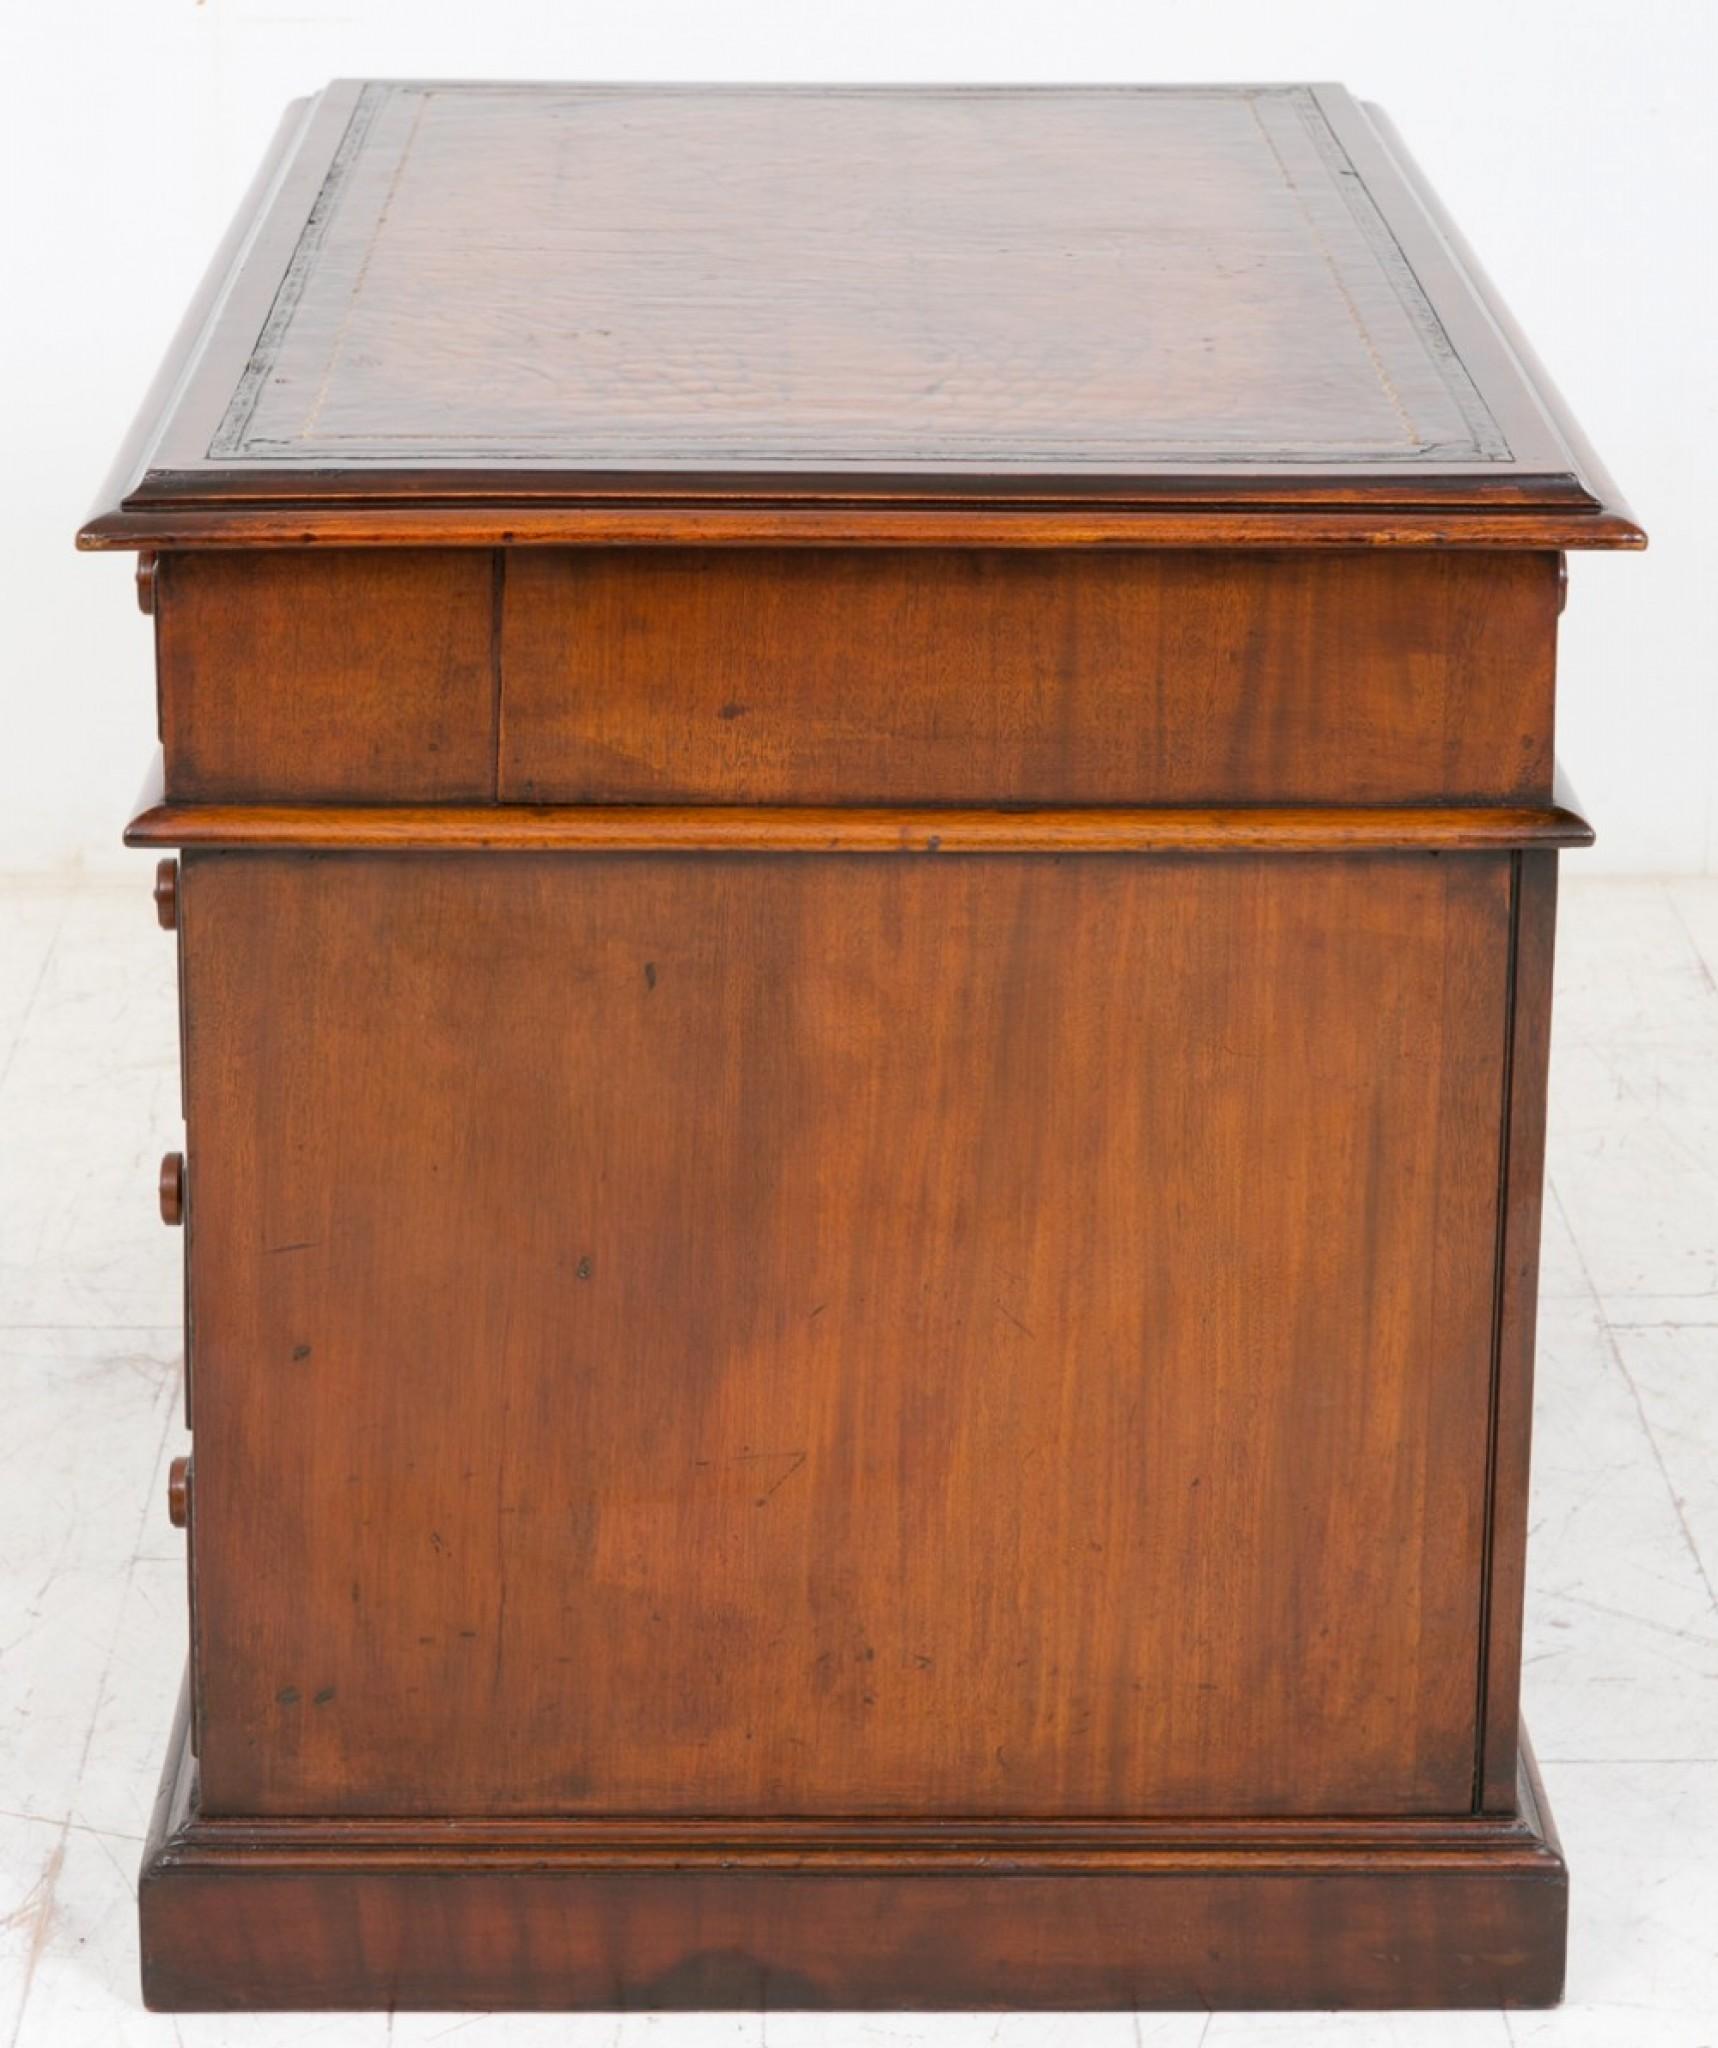 Victorian Pedestal Desk Antique Mahogany Writing Table, 1850 For Sale 6